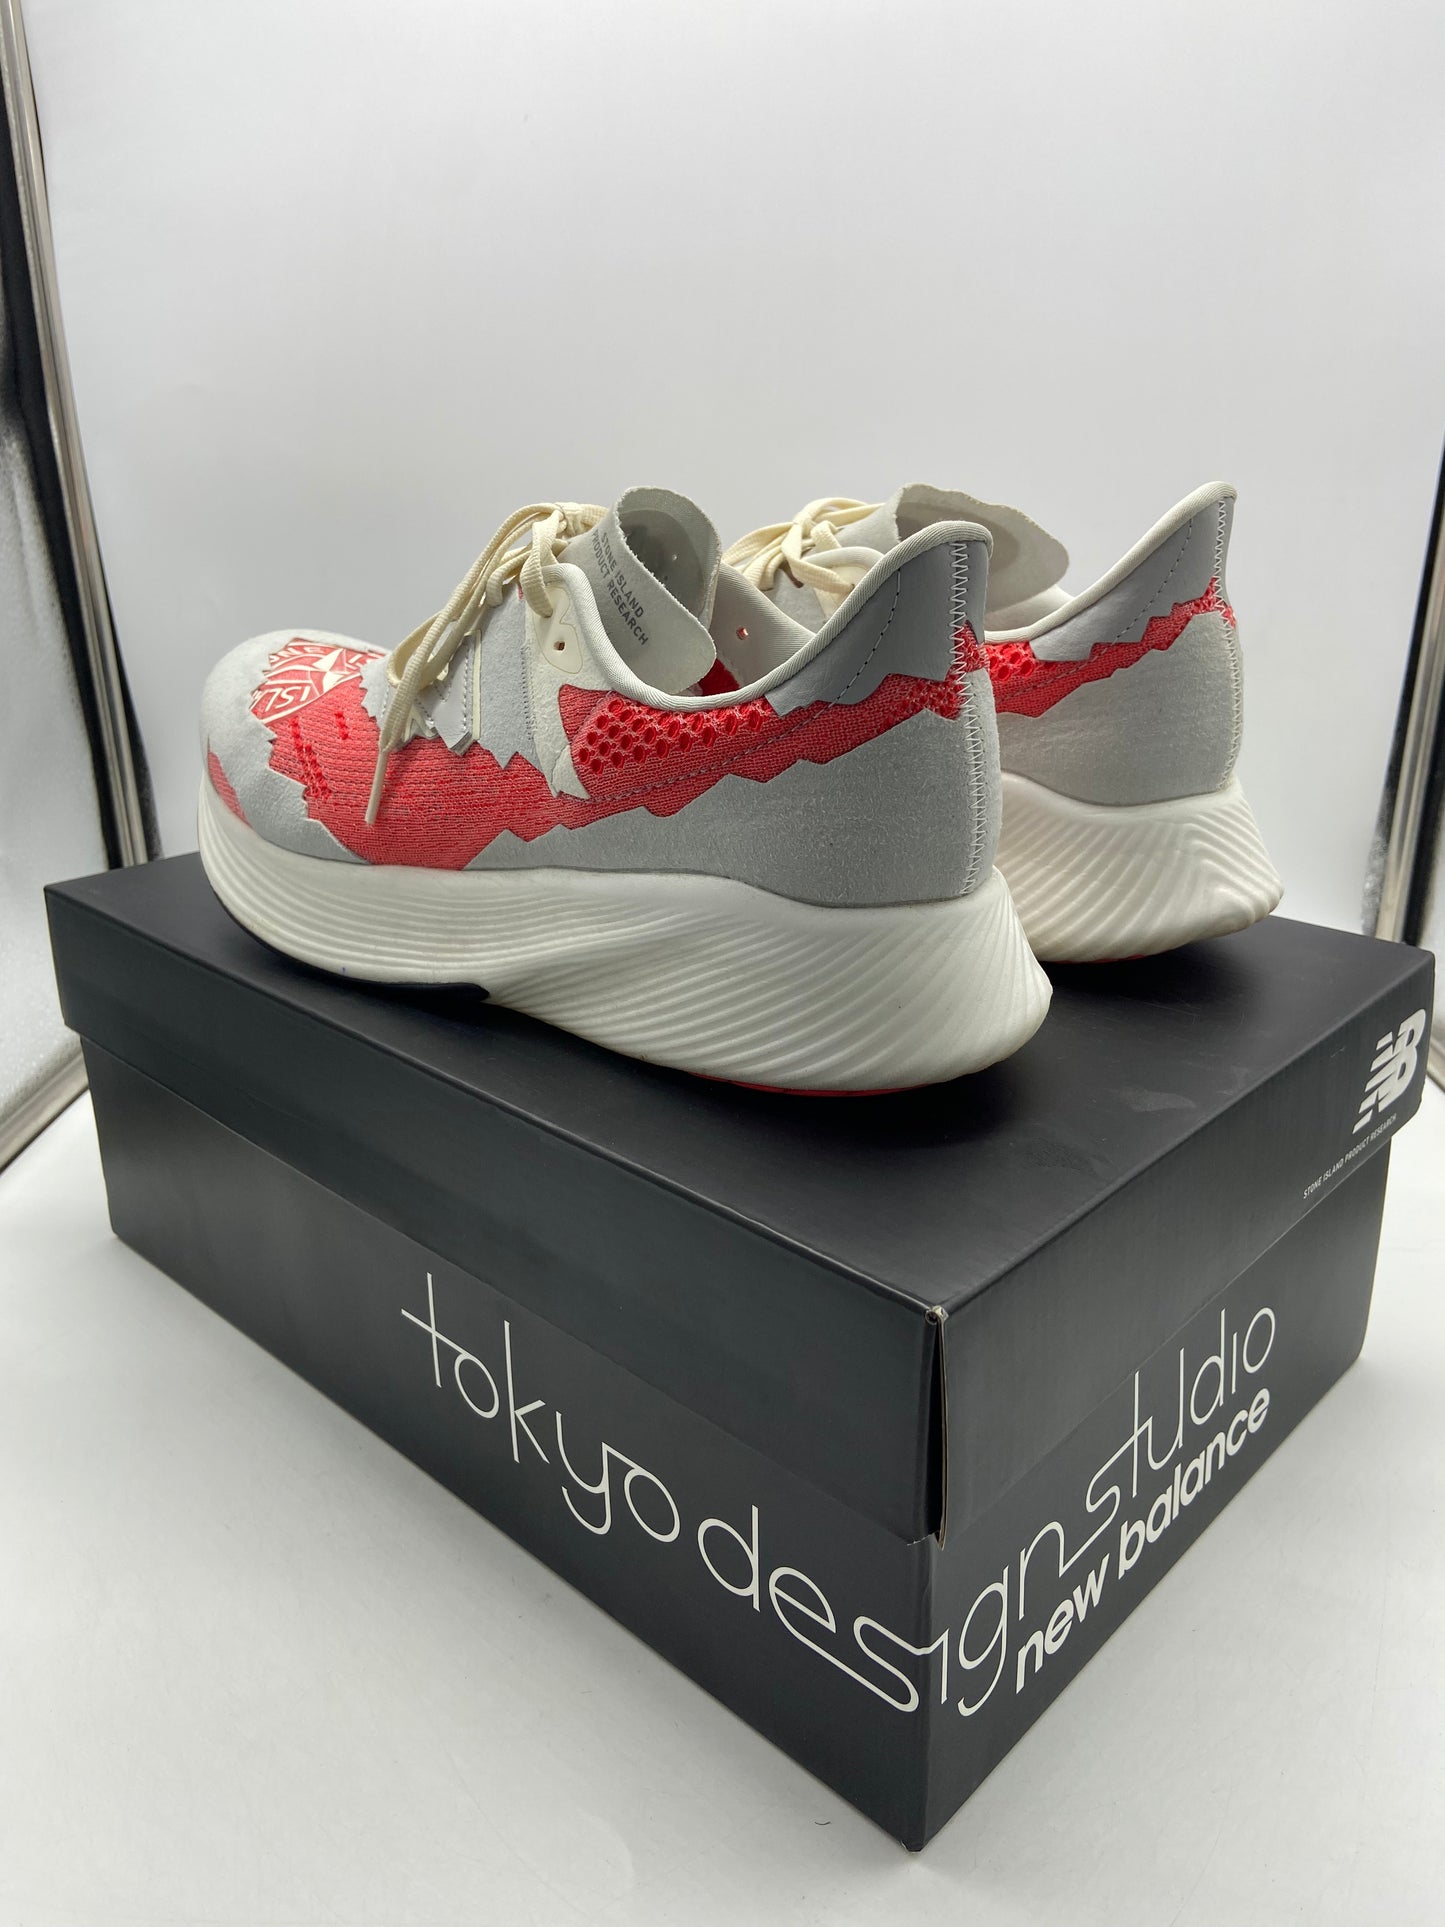 Preowned Stone Island x Tokyo Design Studio x FuelCell RC Elite v2 'Energy Red' Sz 13M/14.5W